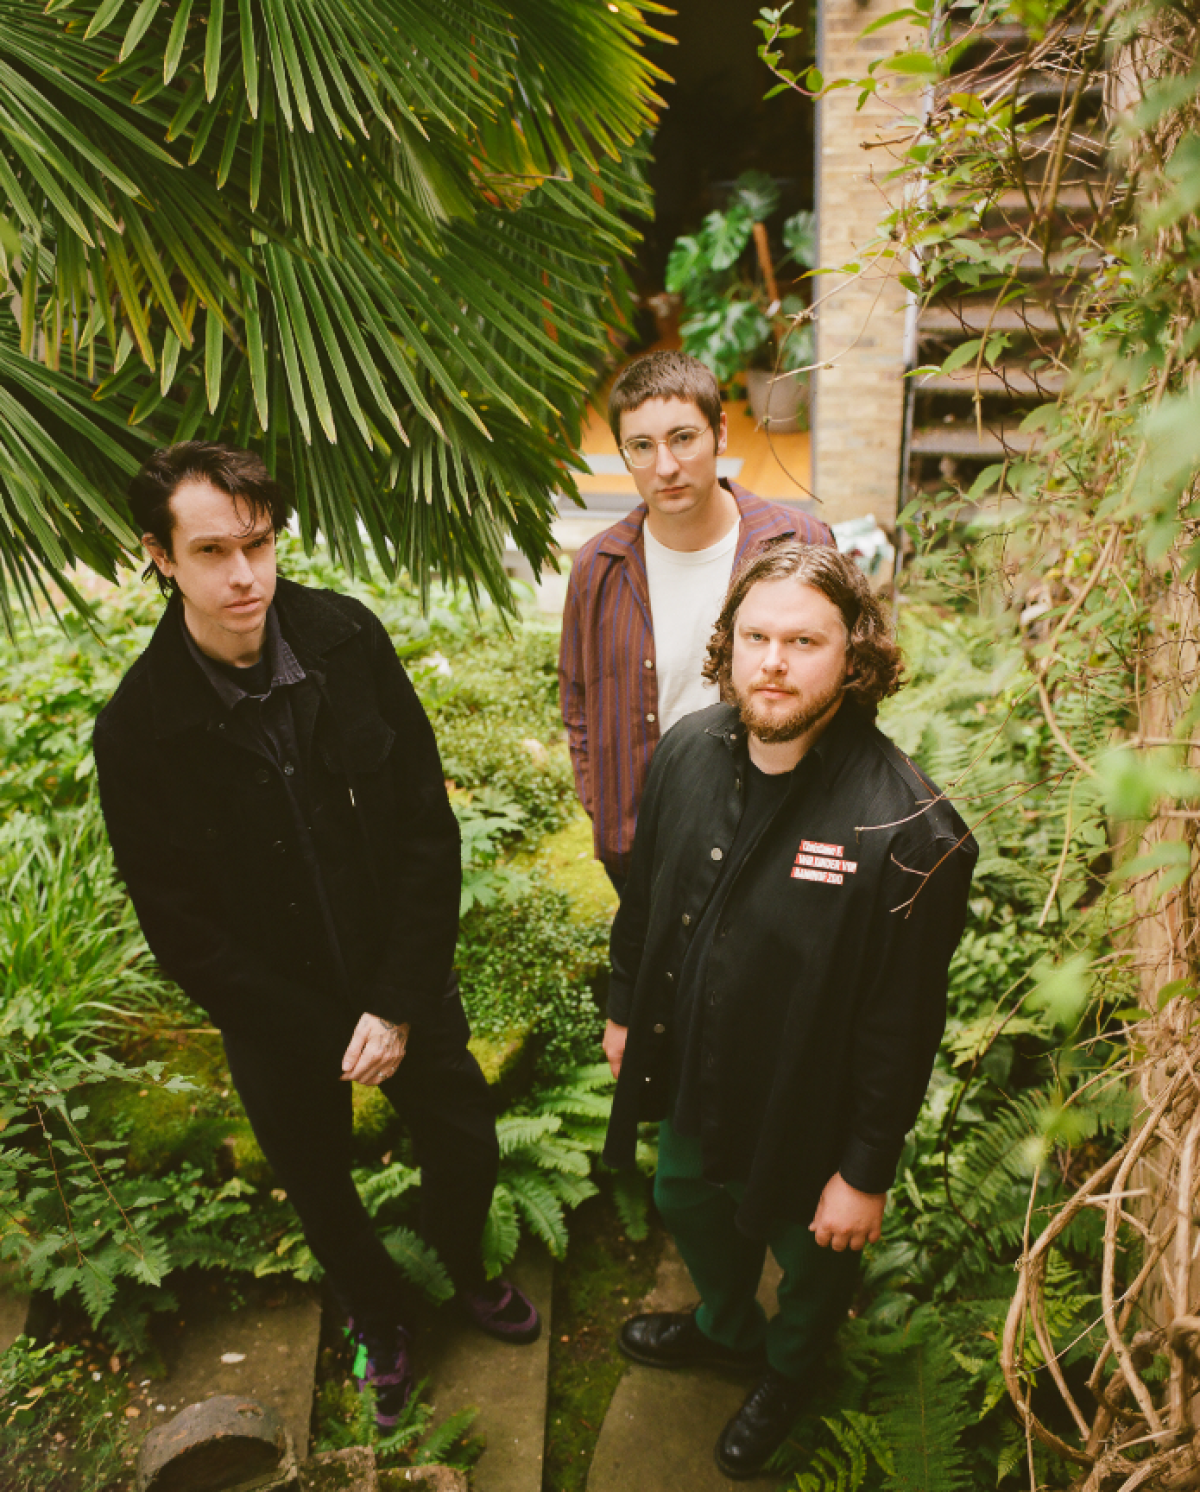 Indie rock band alt-J will perform at Pechanga Arena in San Diego in March 2022.